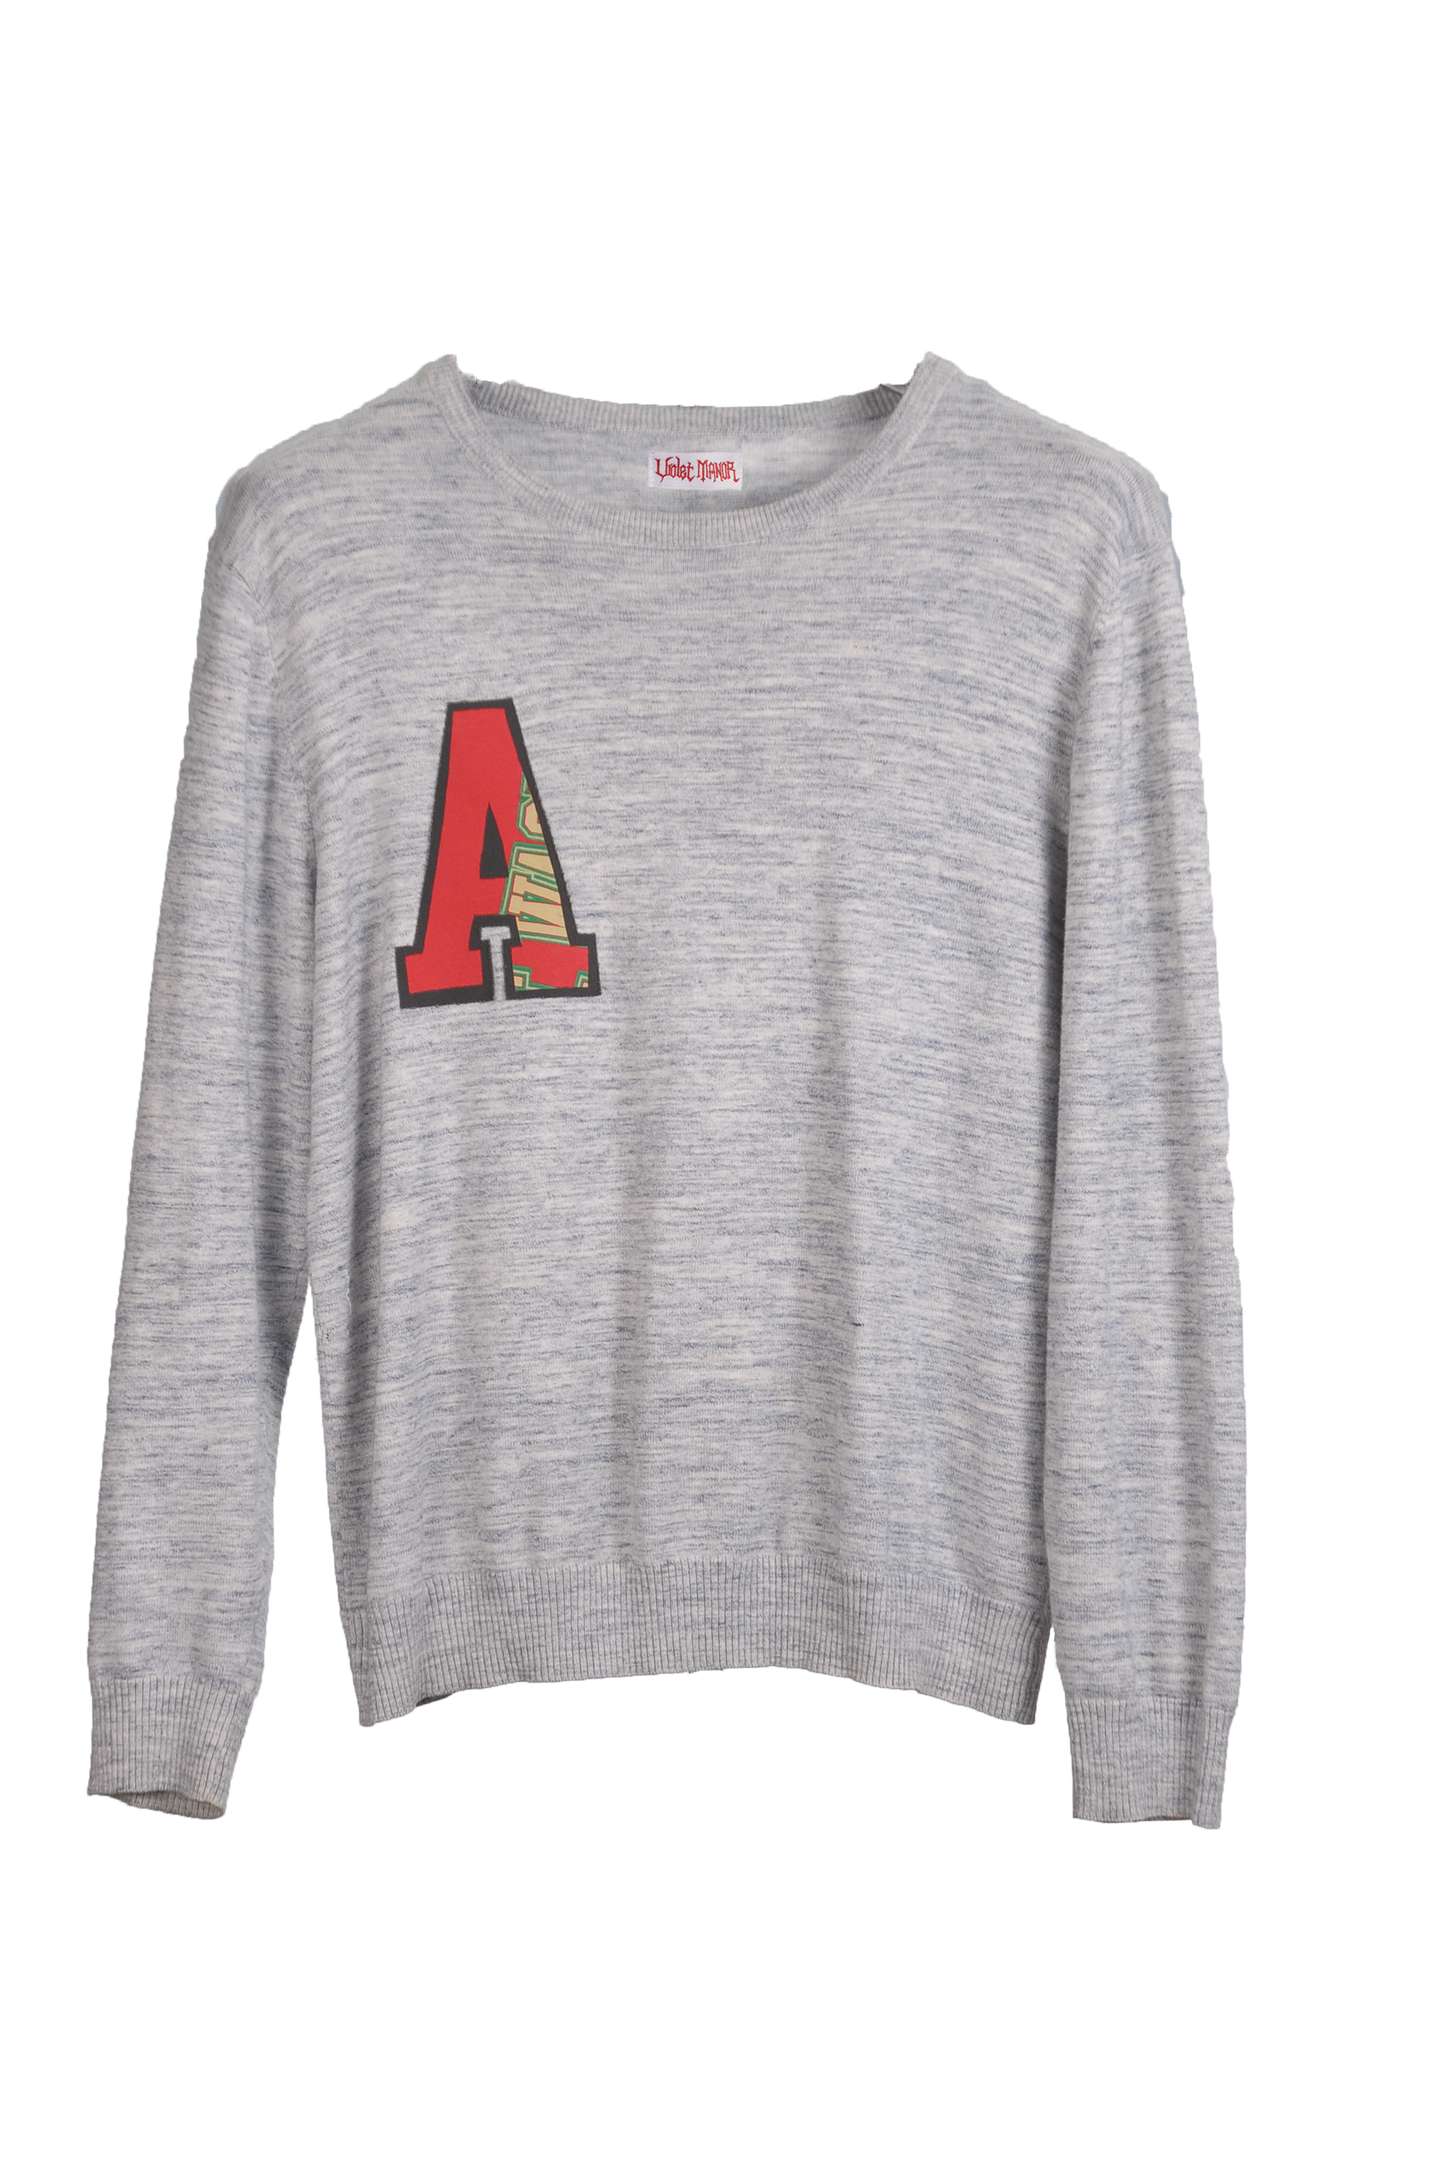 Letter Sweater "A" light grey and red